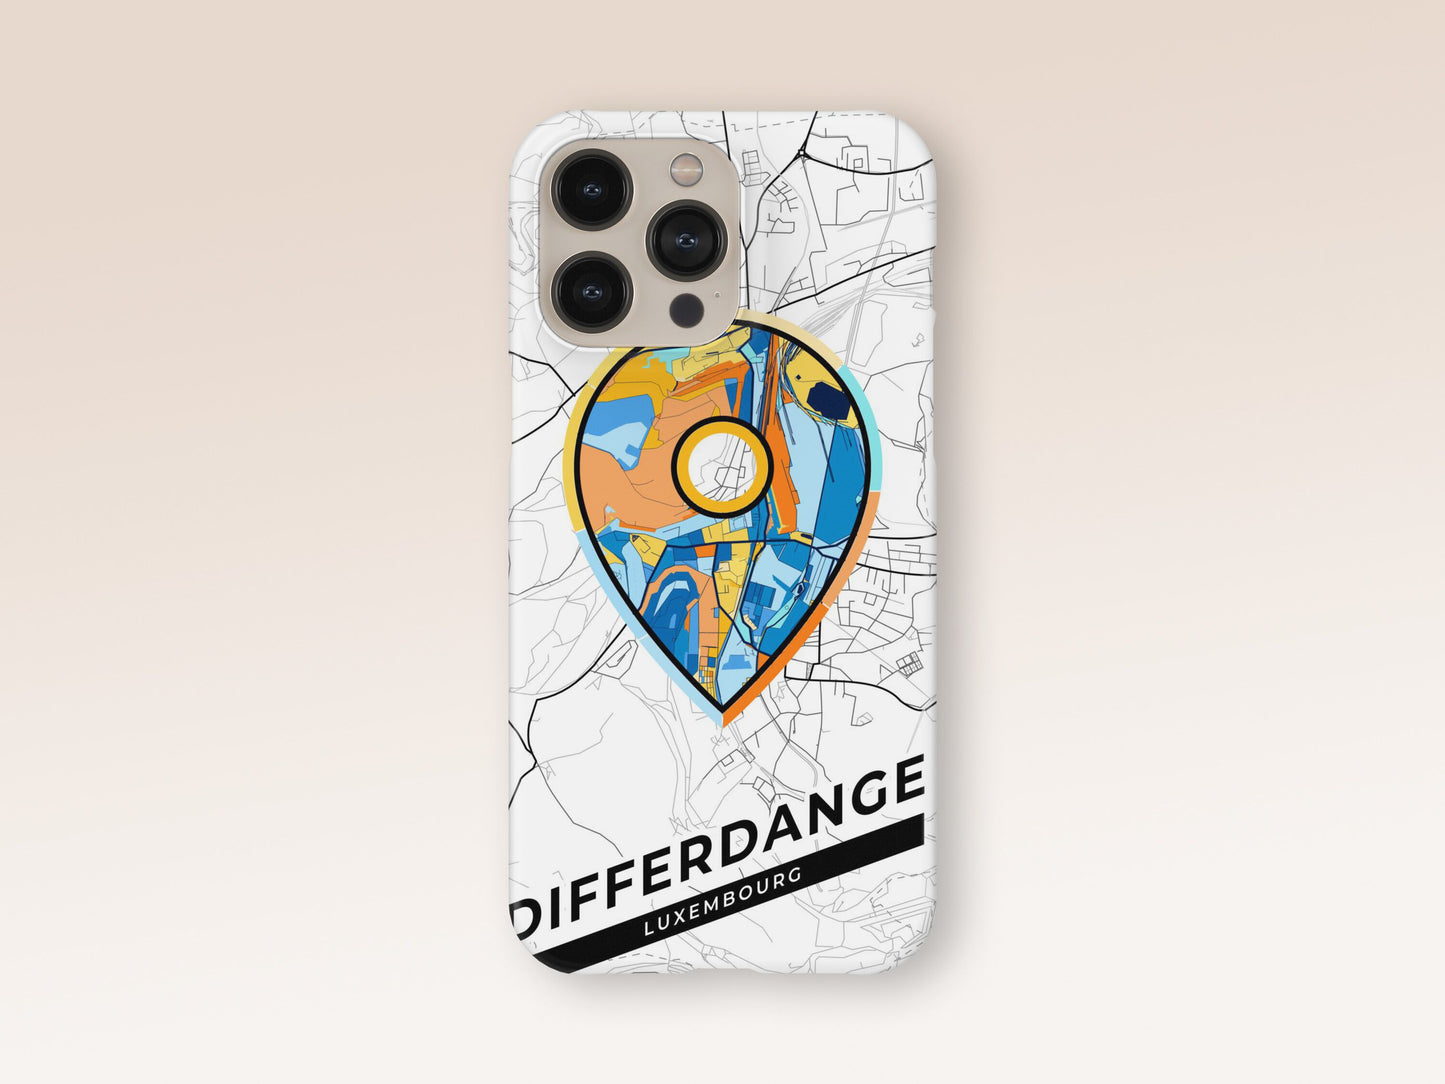 Differdange Luxembourg slim phone case with colorful icon. Birthday, wedding or housewarming gift. Couple match cases. 1